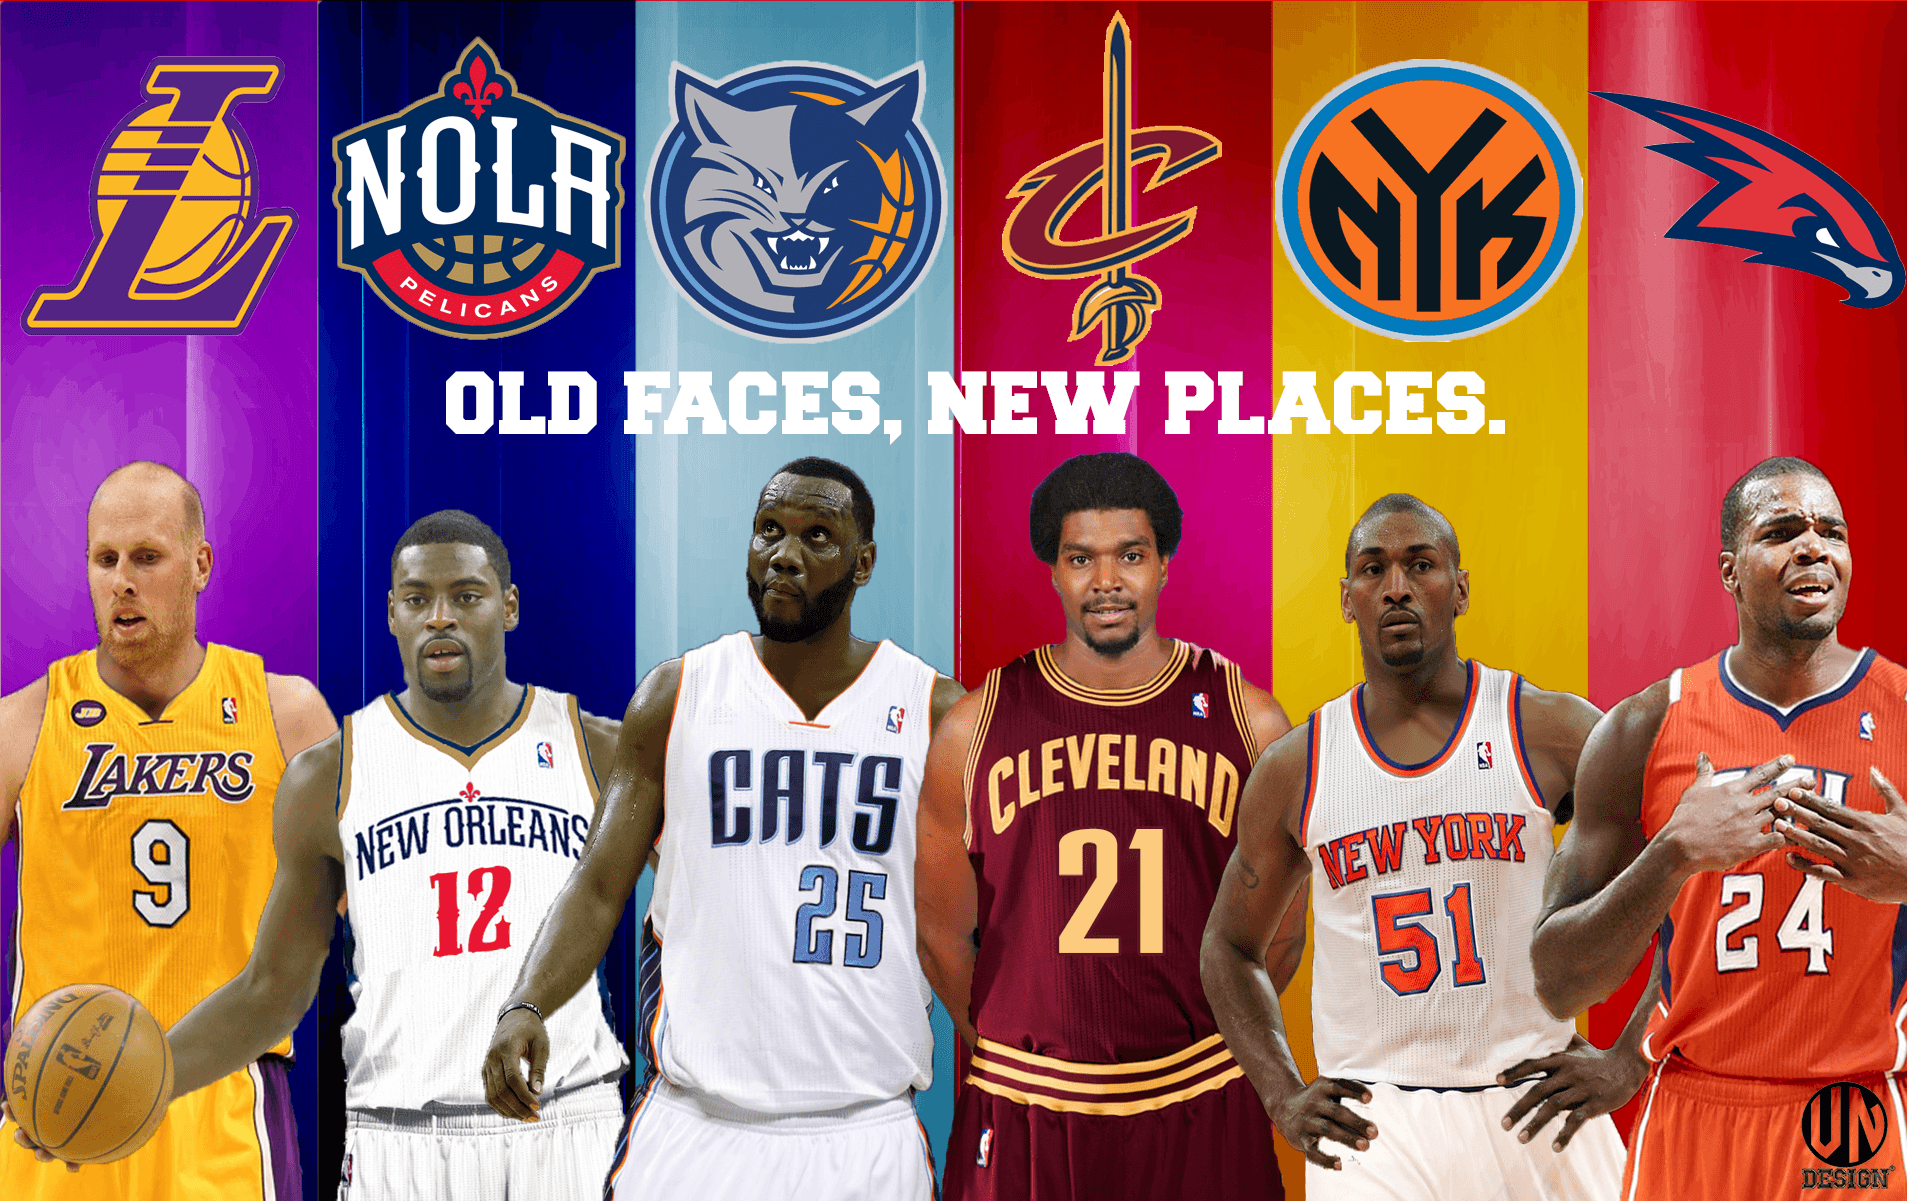 Old Faces New Places. VN Design. NBA Wallpaper. Basketball